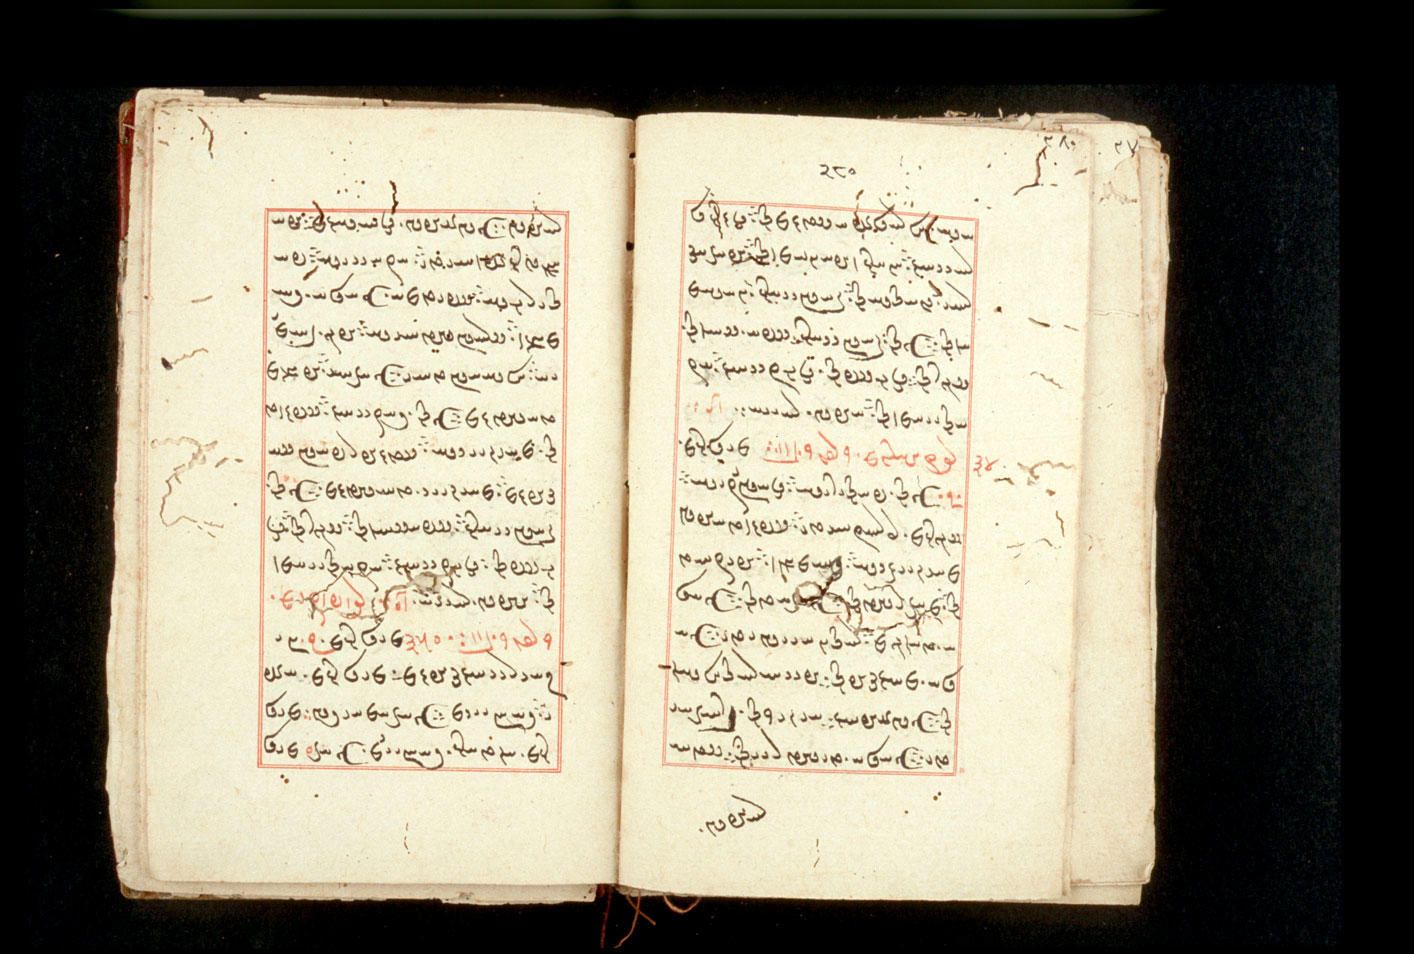 Folios 280v (right) and 281r (left)